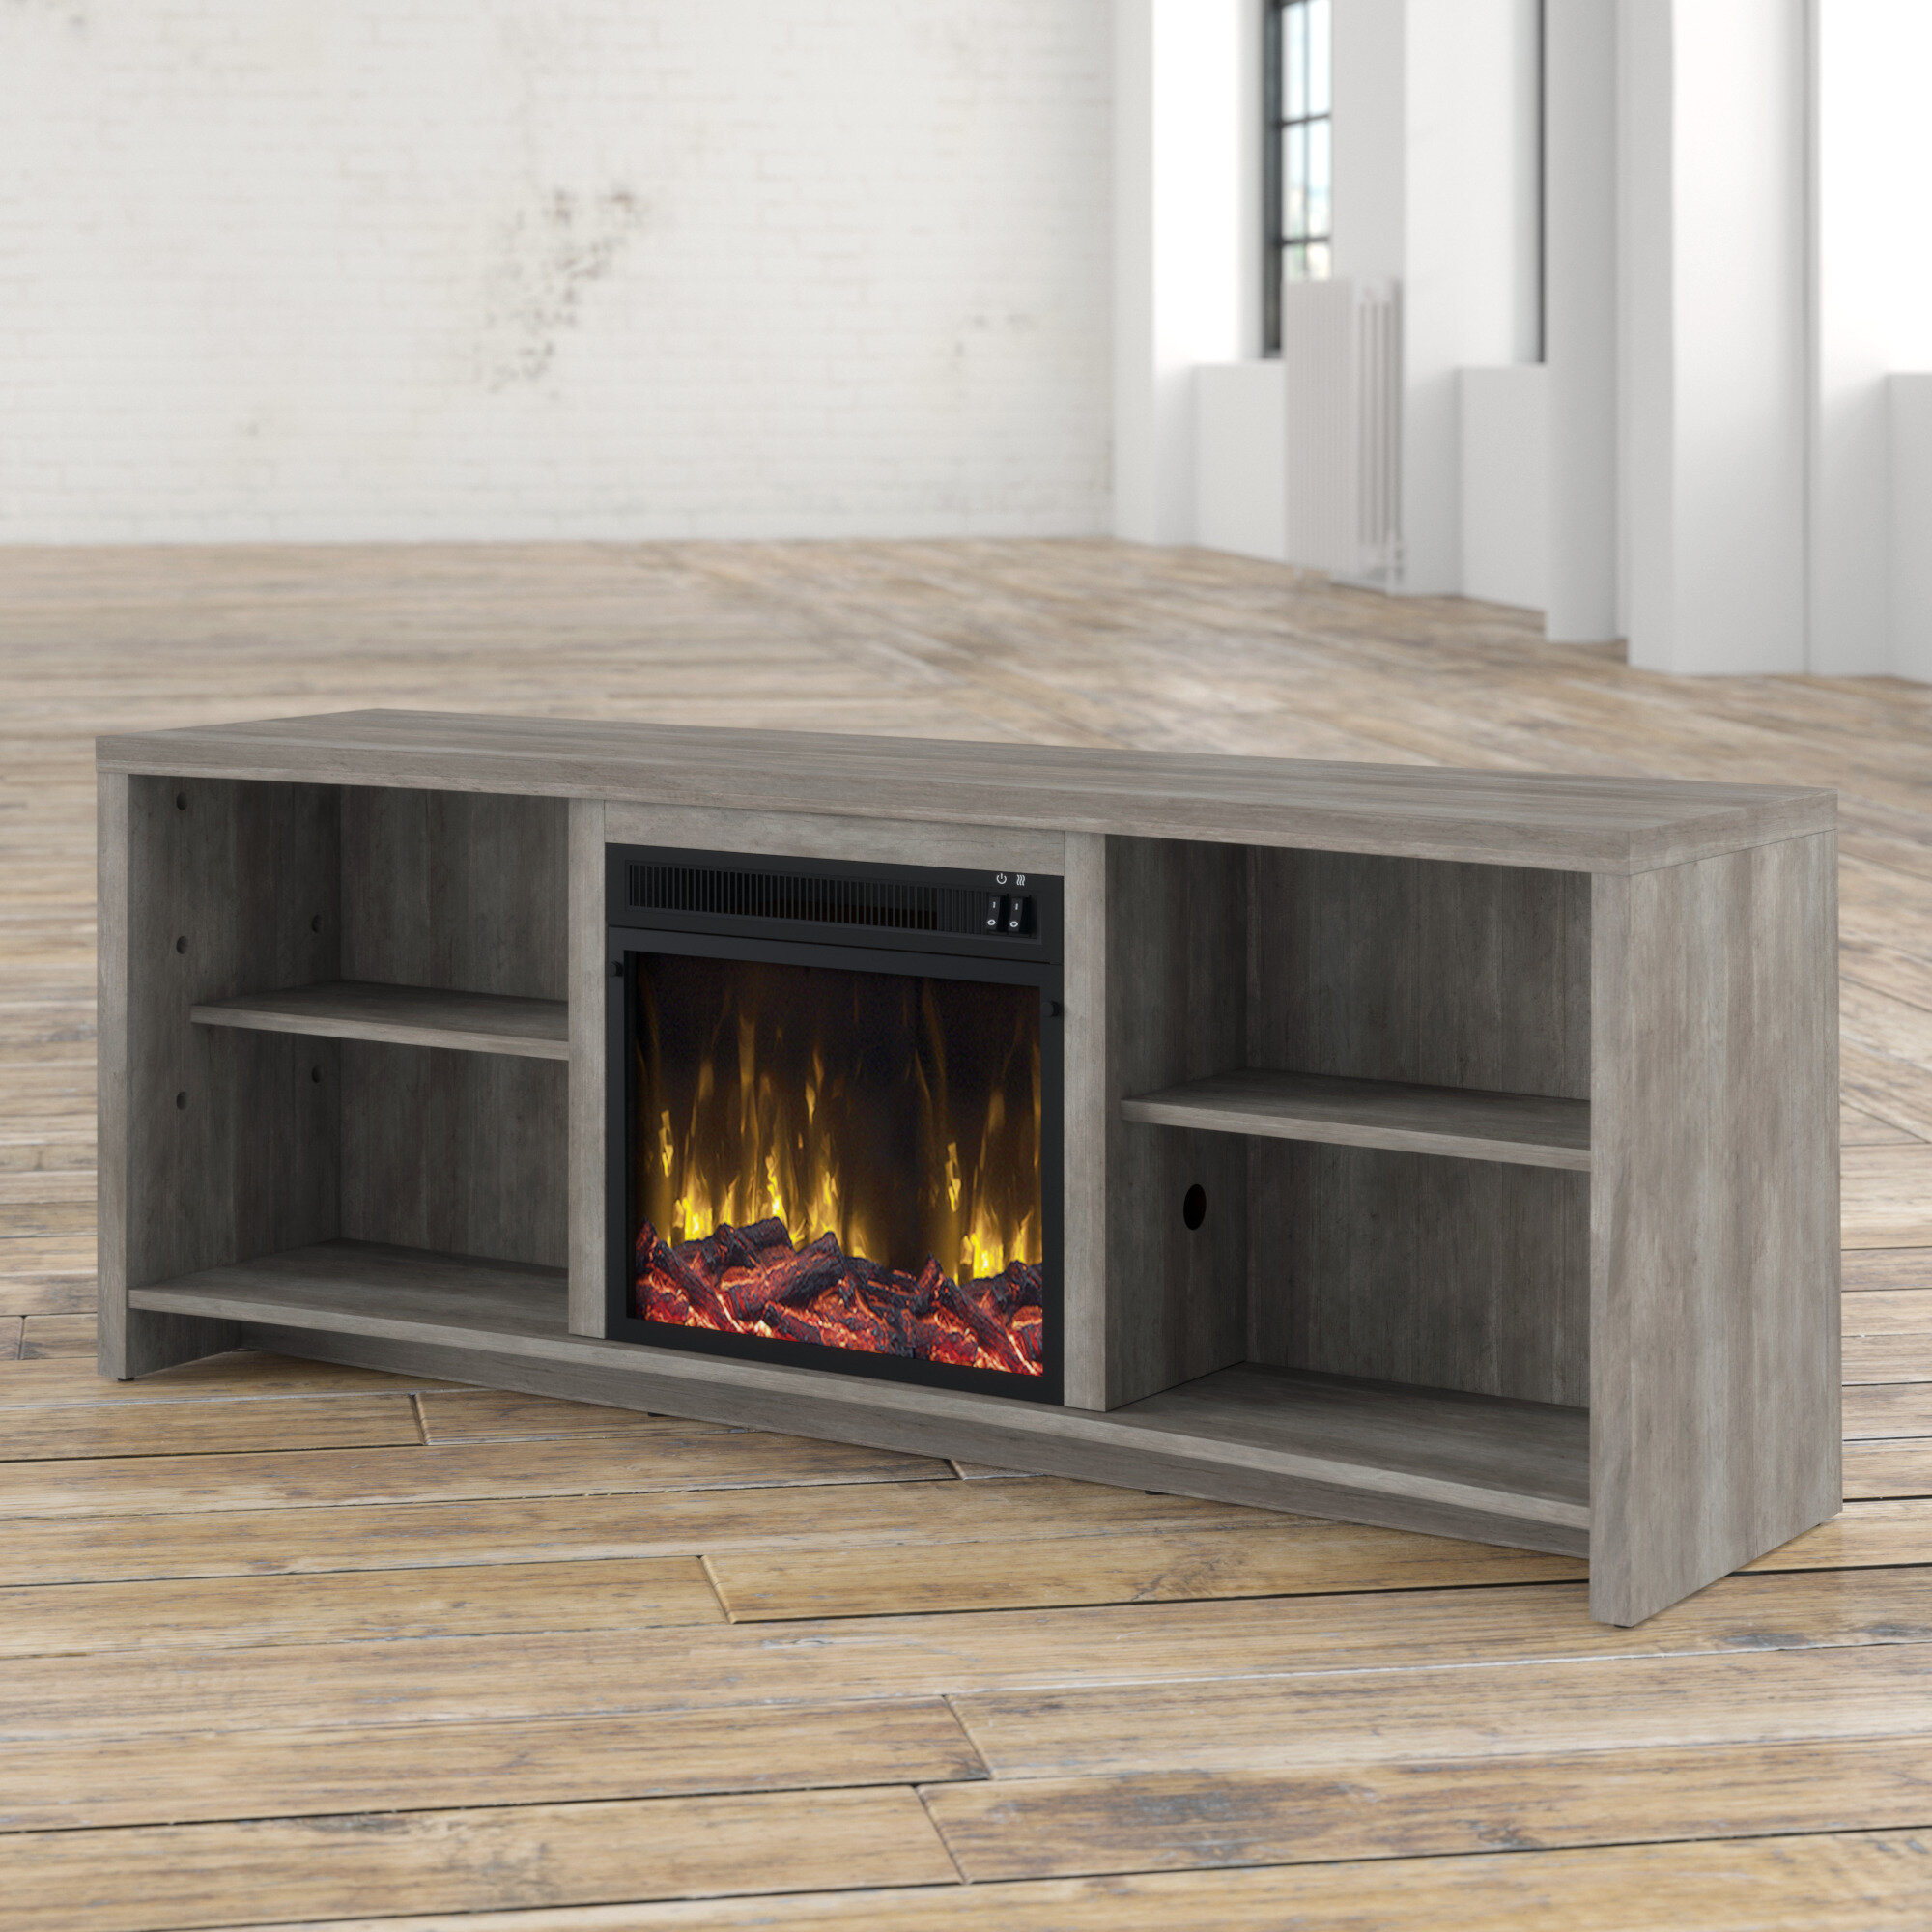 Pelton TV Stand for TVs up to 78" with Electric Fireplace Included